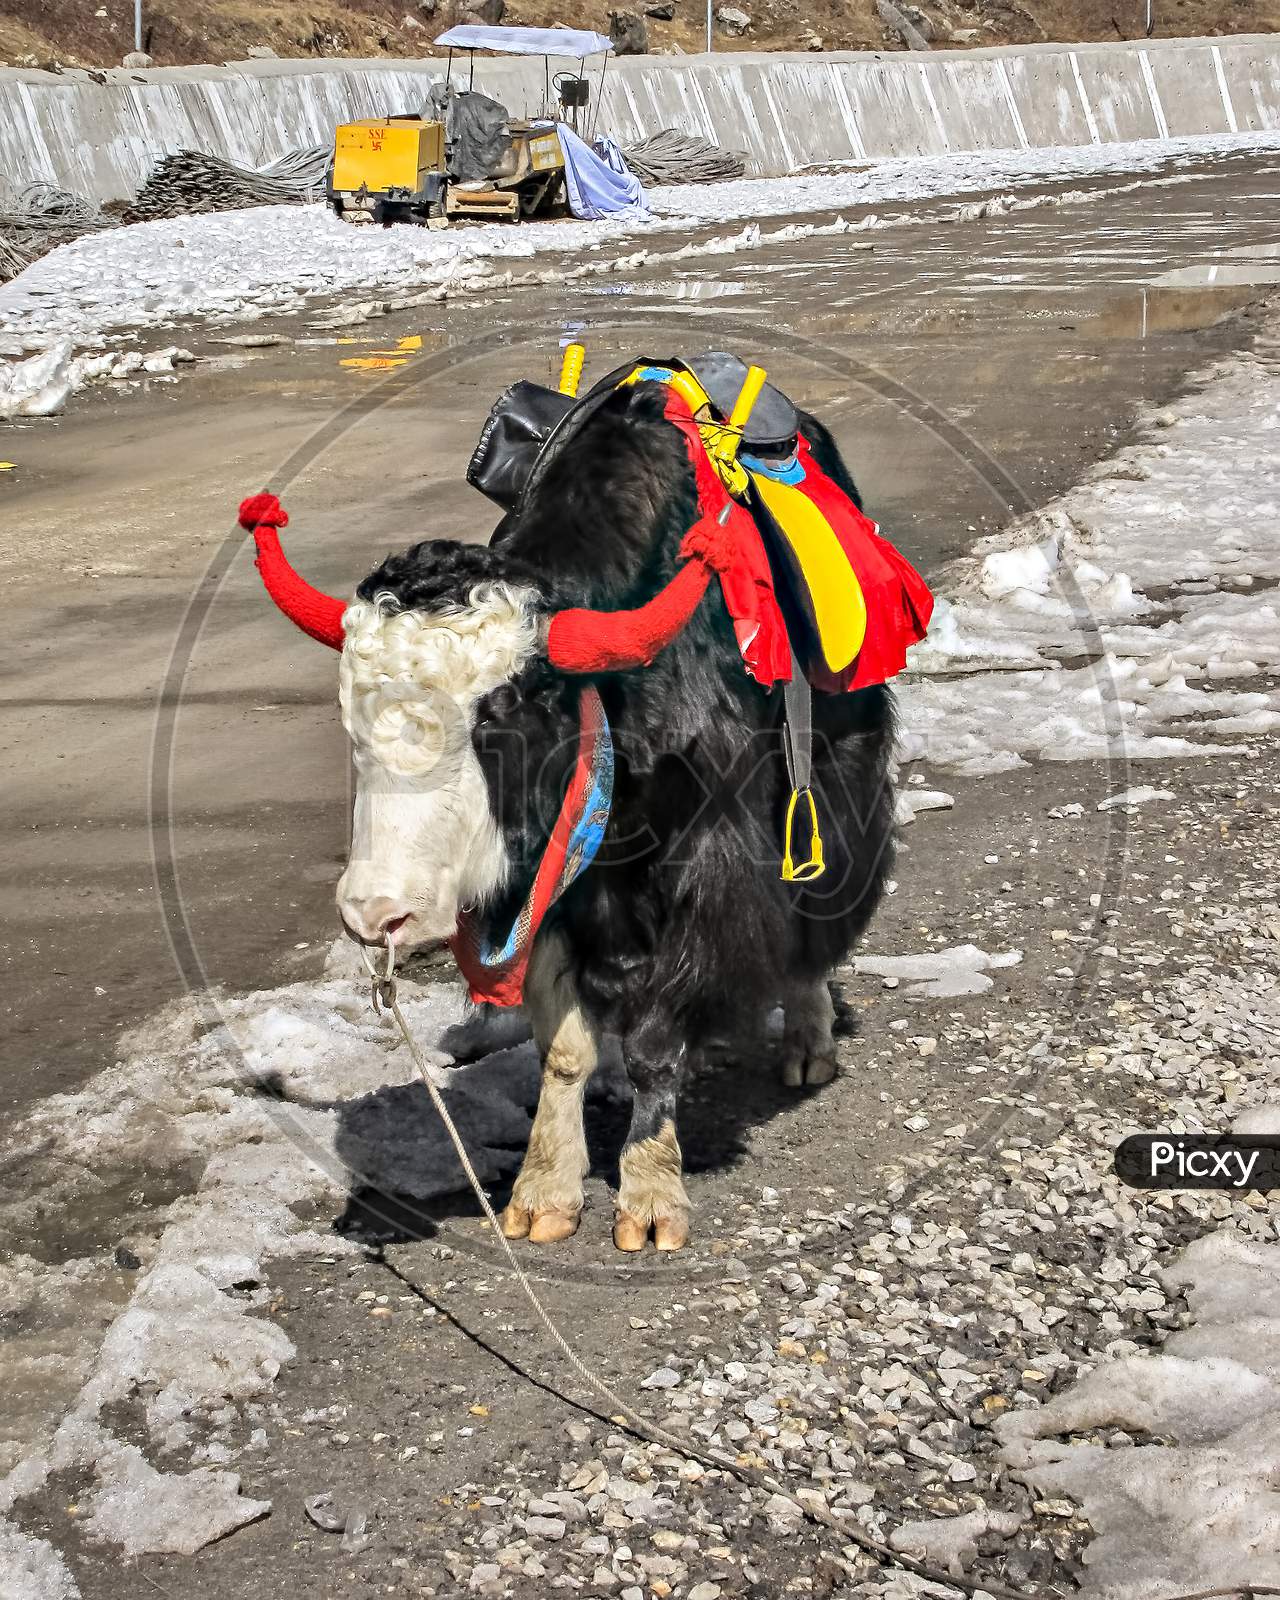 Decorated Yak for tourist photography near frozen Tsongmo lake in Sikkim, India.